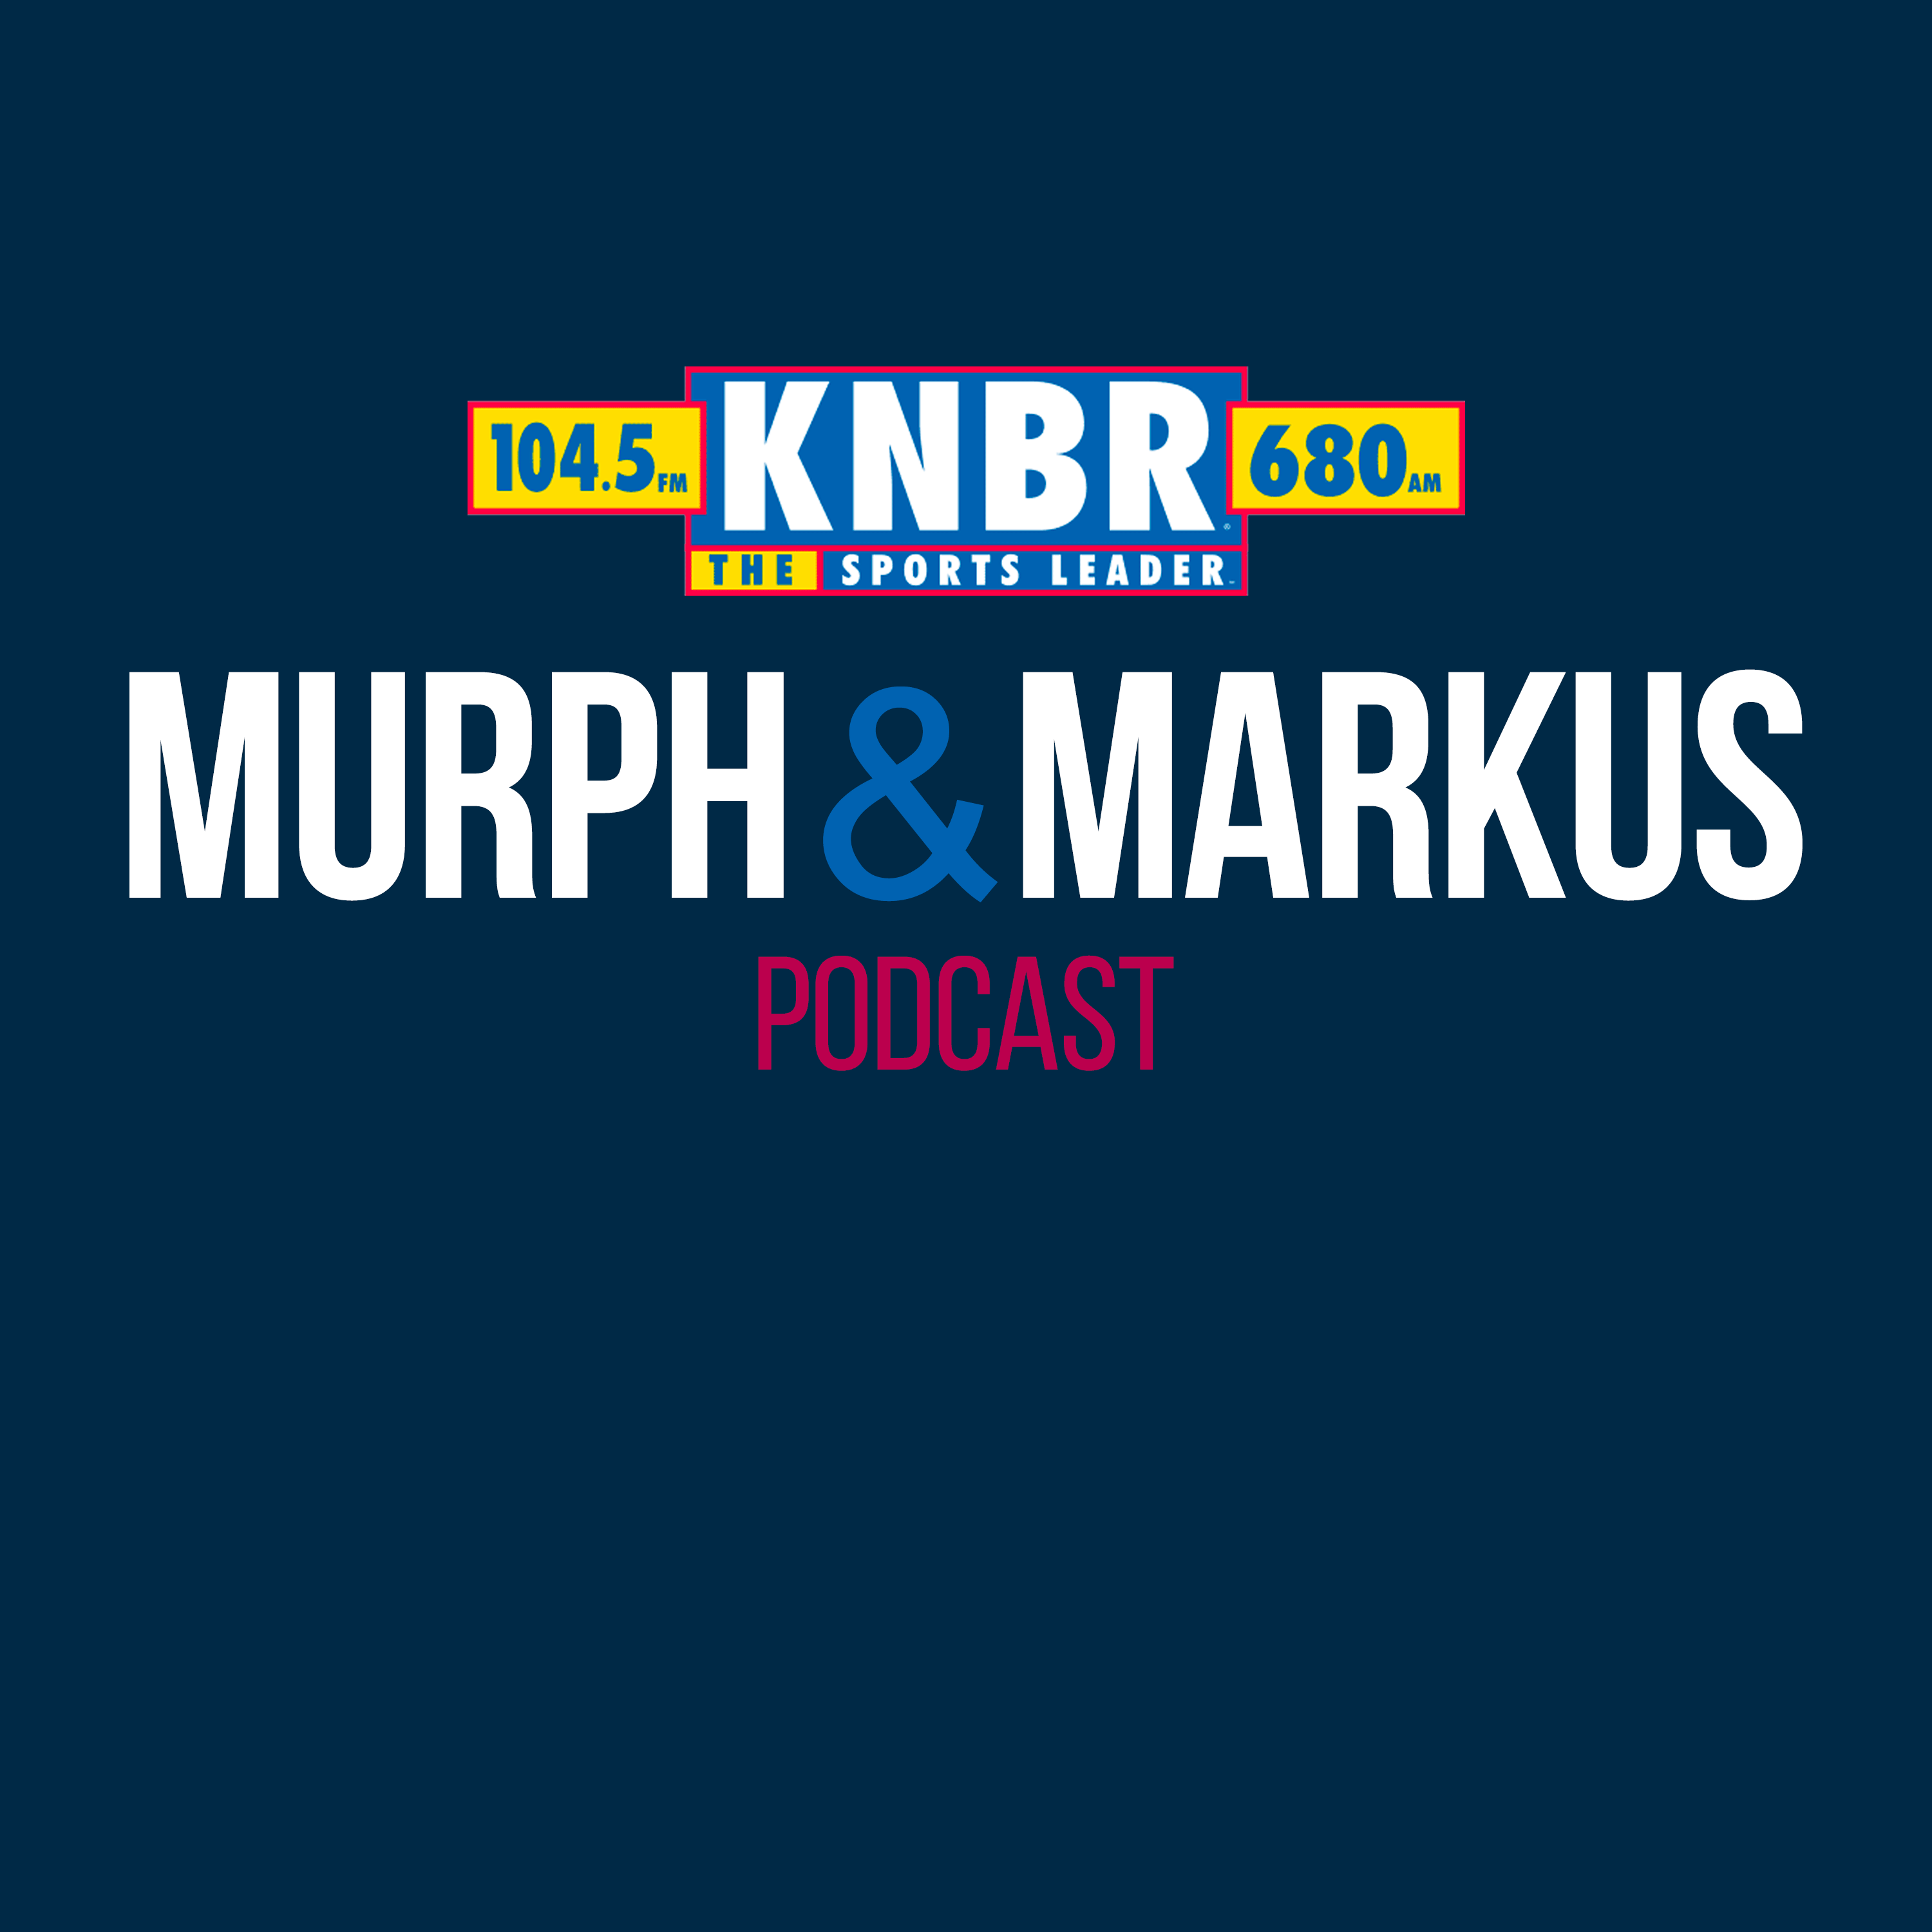 4-11 Hour 3: Murph and Markus discuss how they feel about the Giants up and down homestand